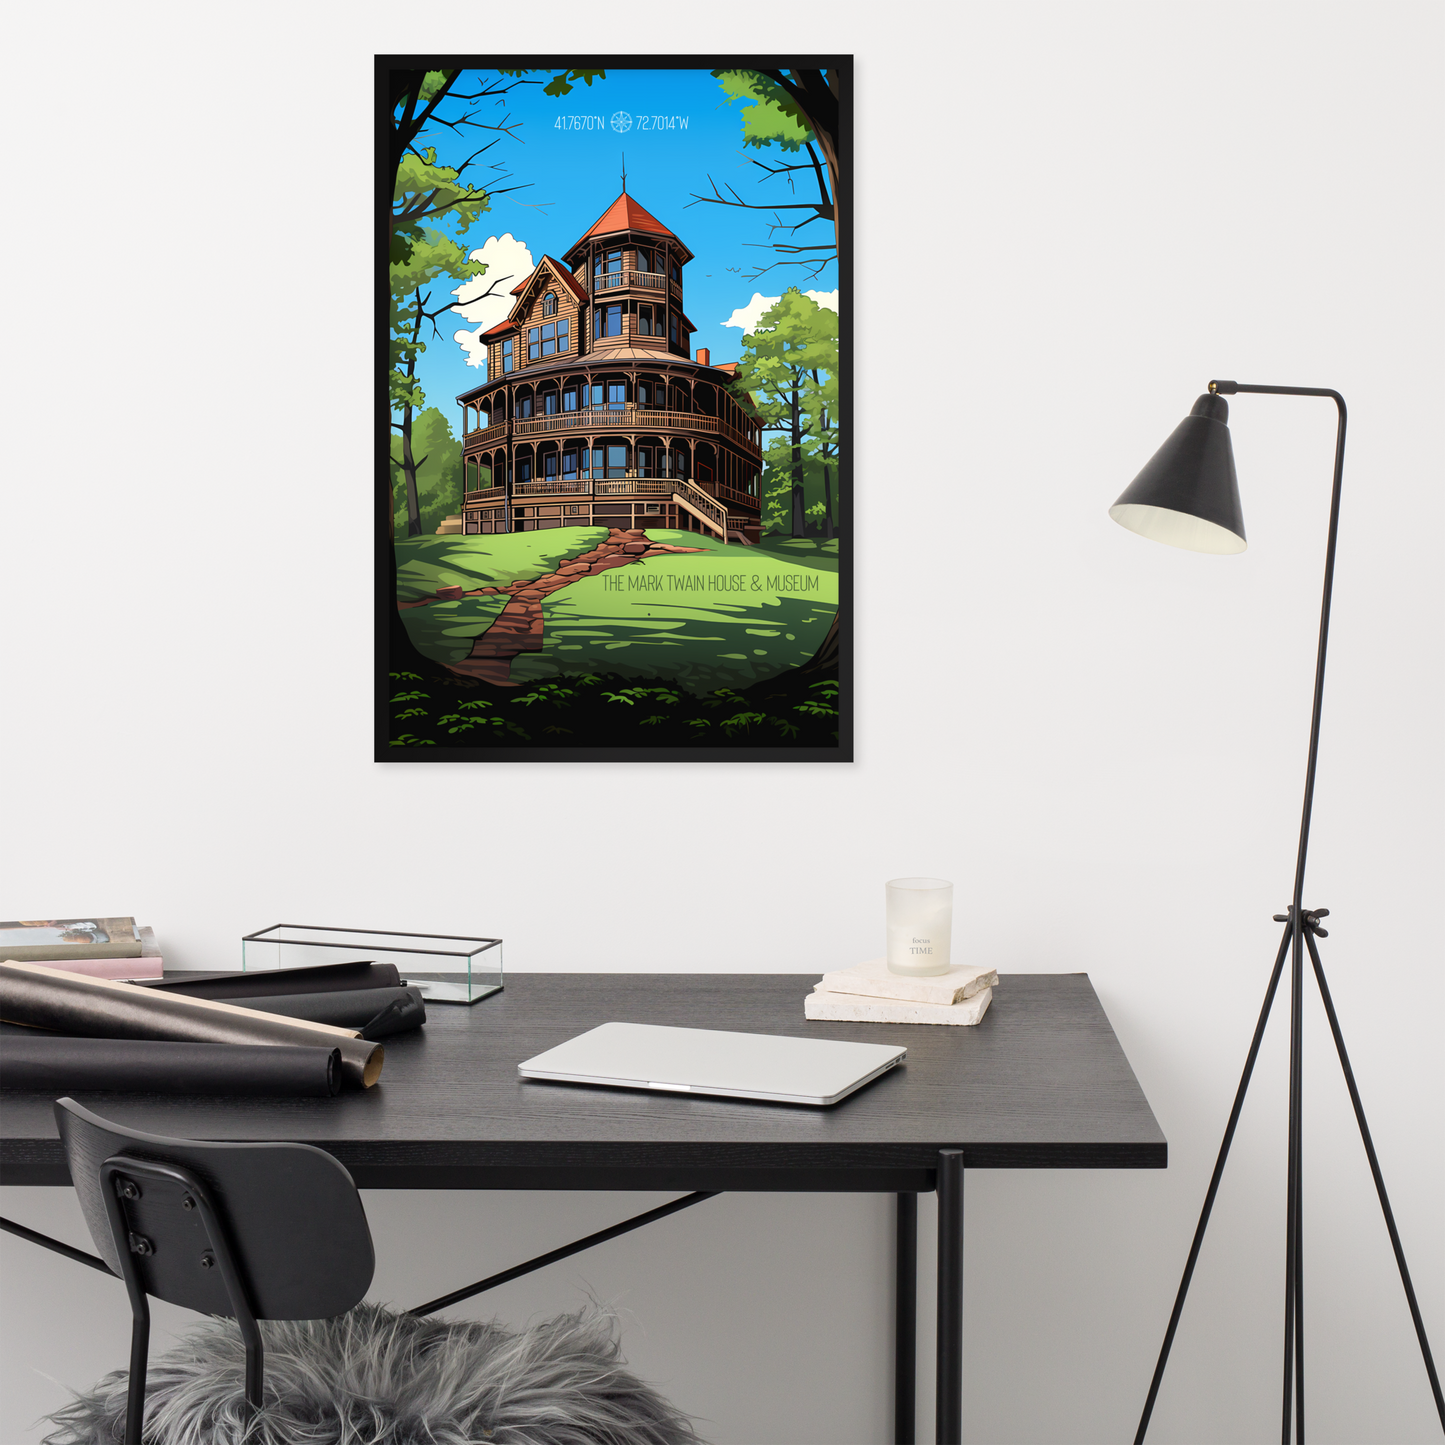 Connecticut - The Mark Twain House & Museum (Framed poster)